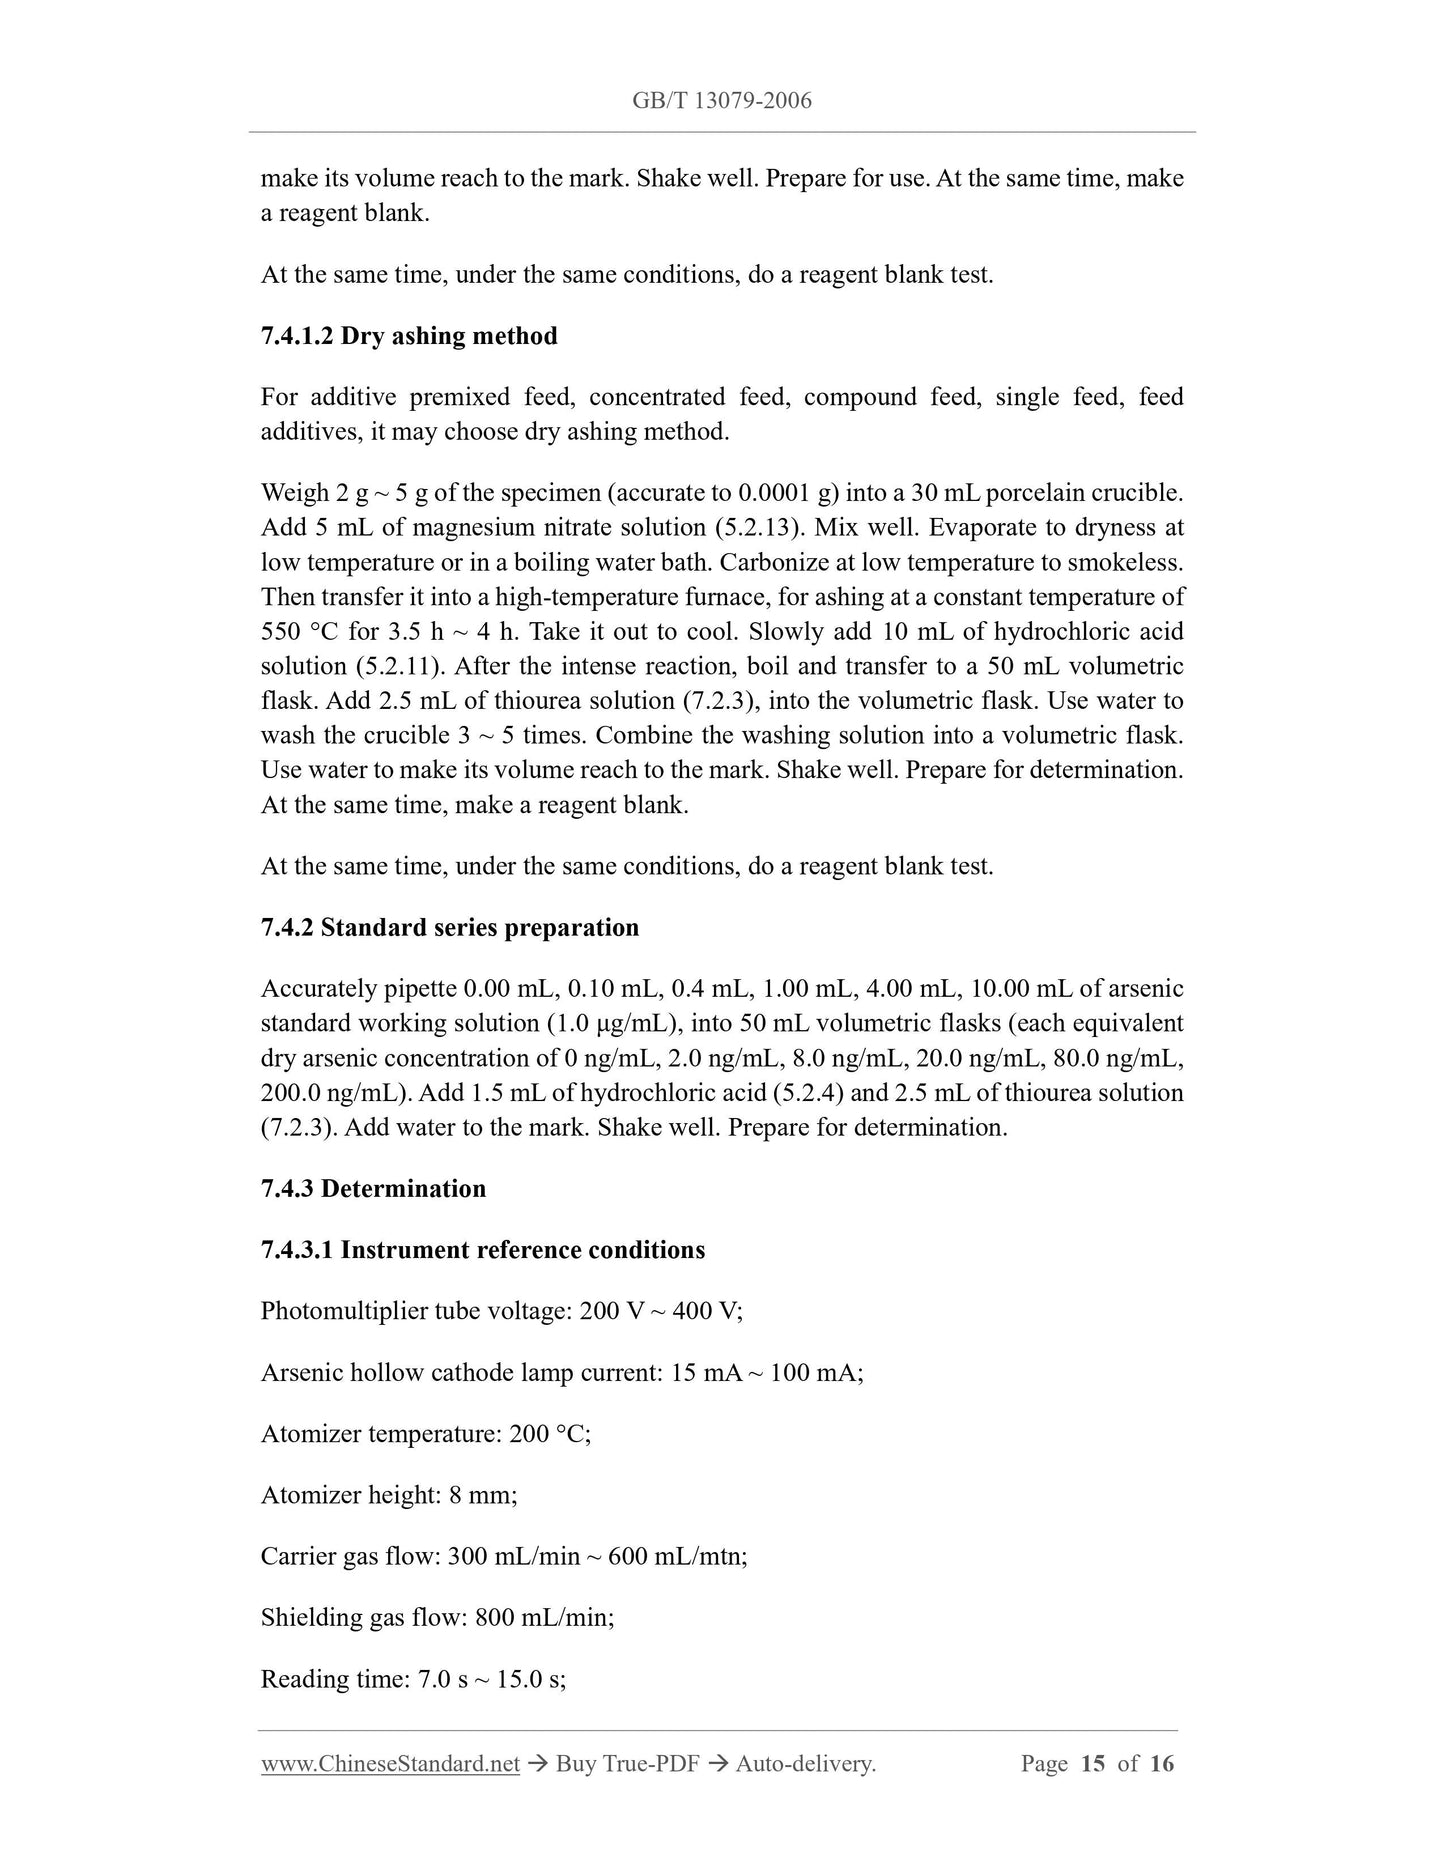 GB/T 13079-2006 Page 10